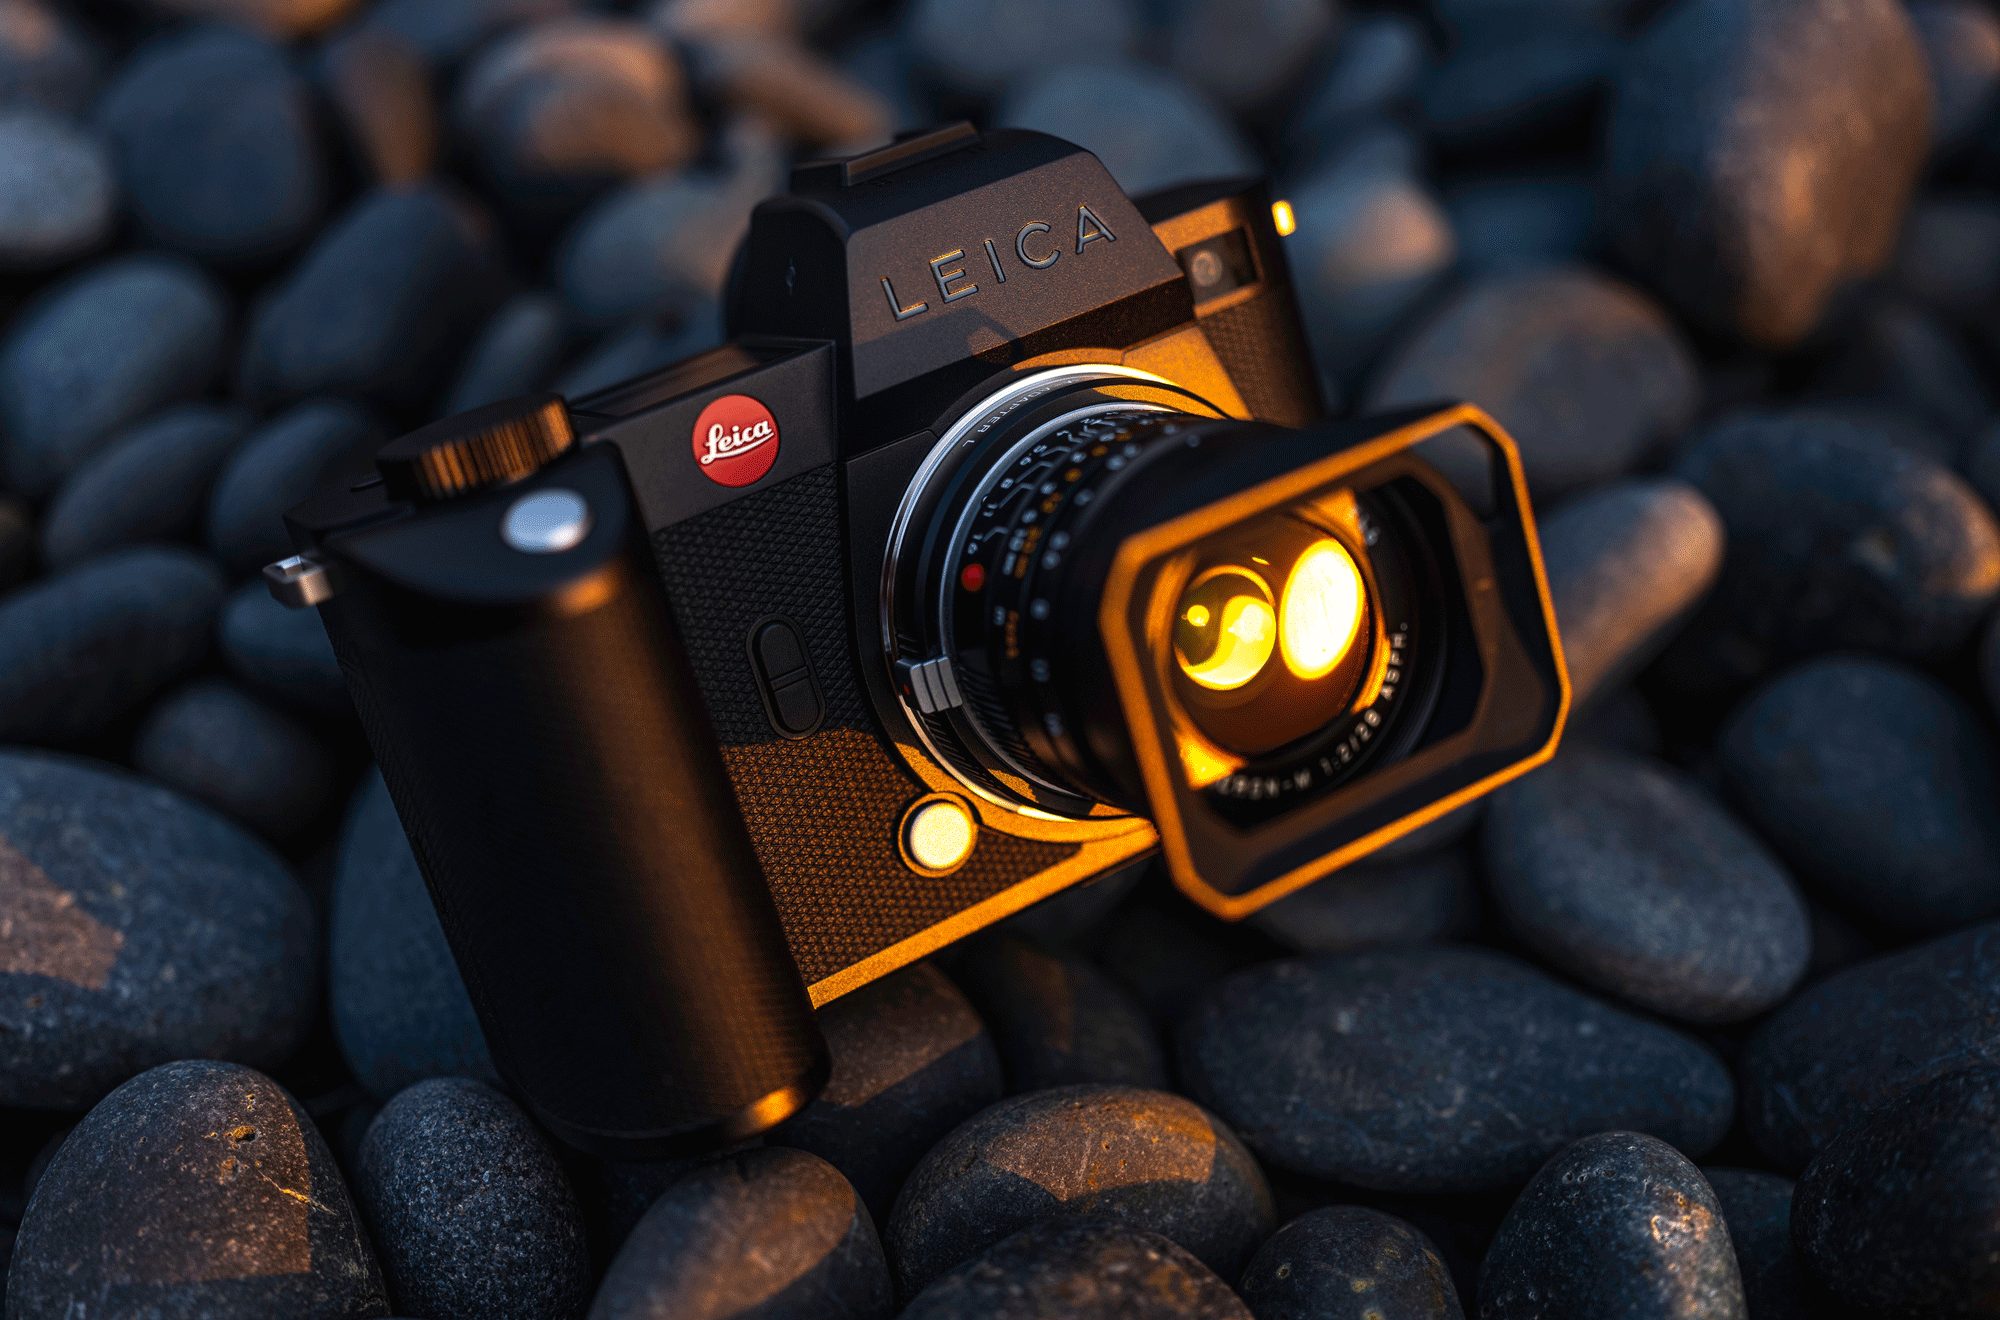 New Firmware Updates  for the Leica SL System